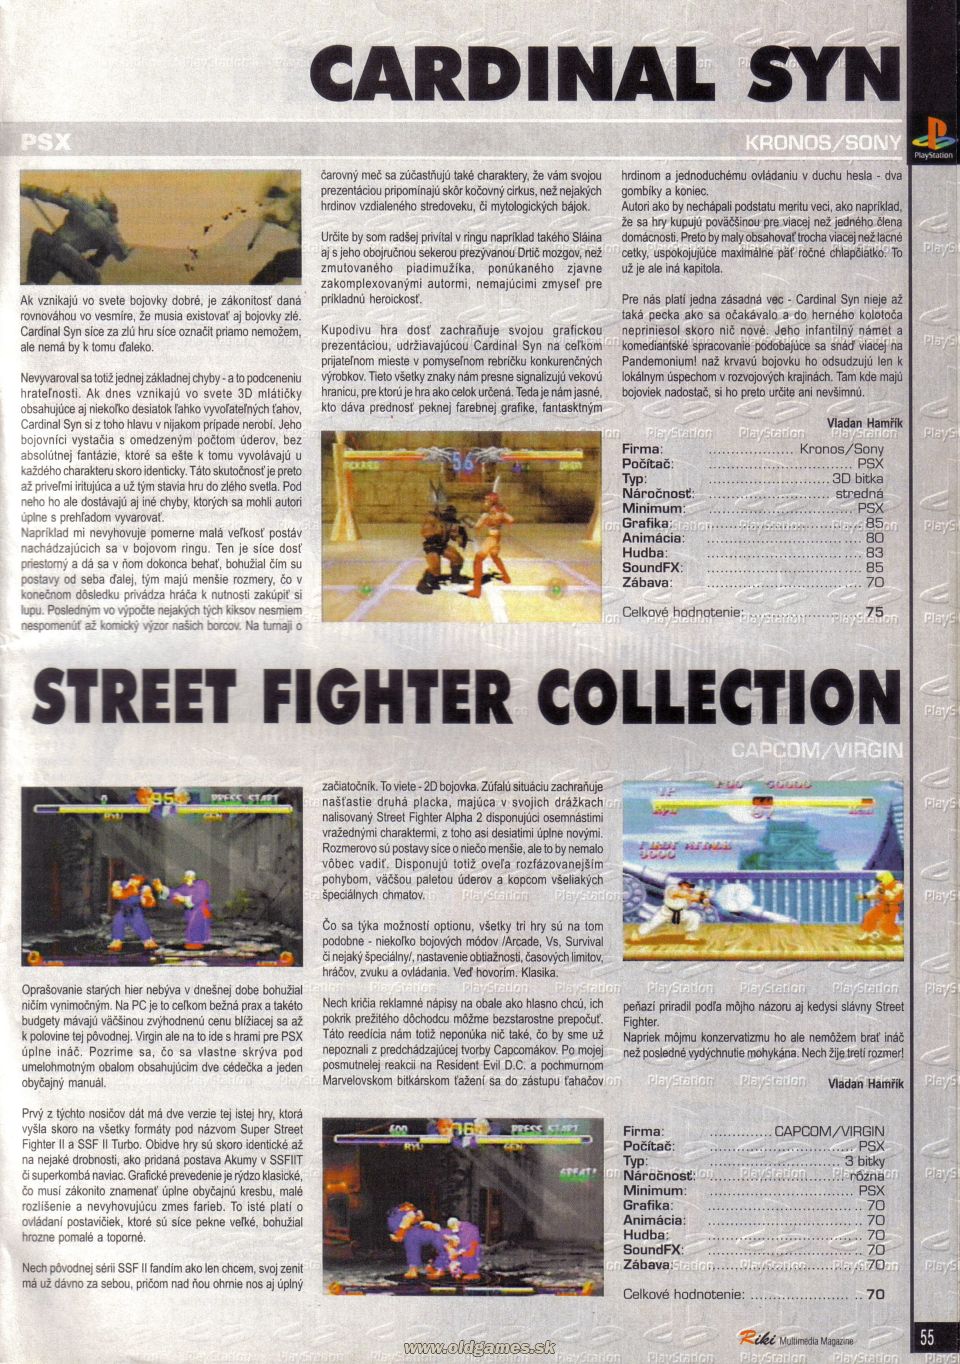 Cardinal Syn, Street Fighter Collection